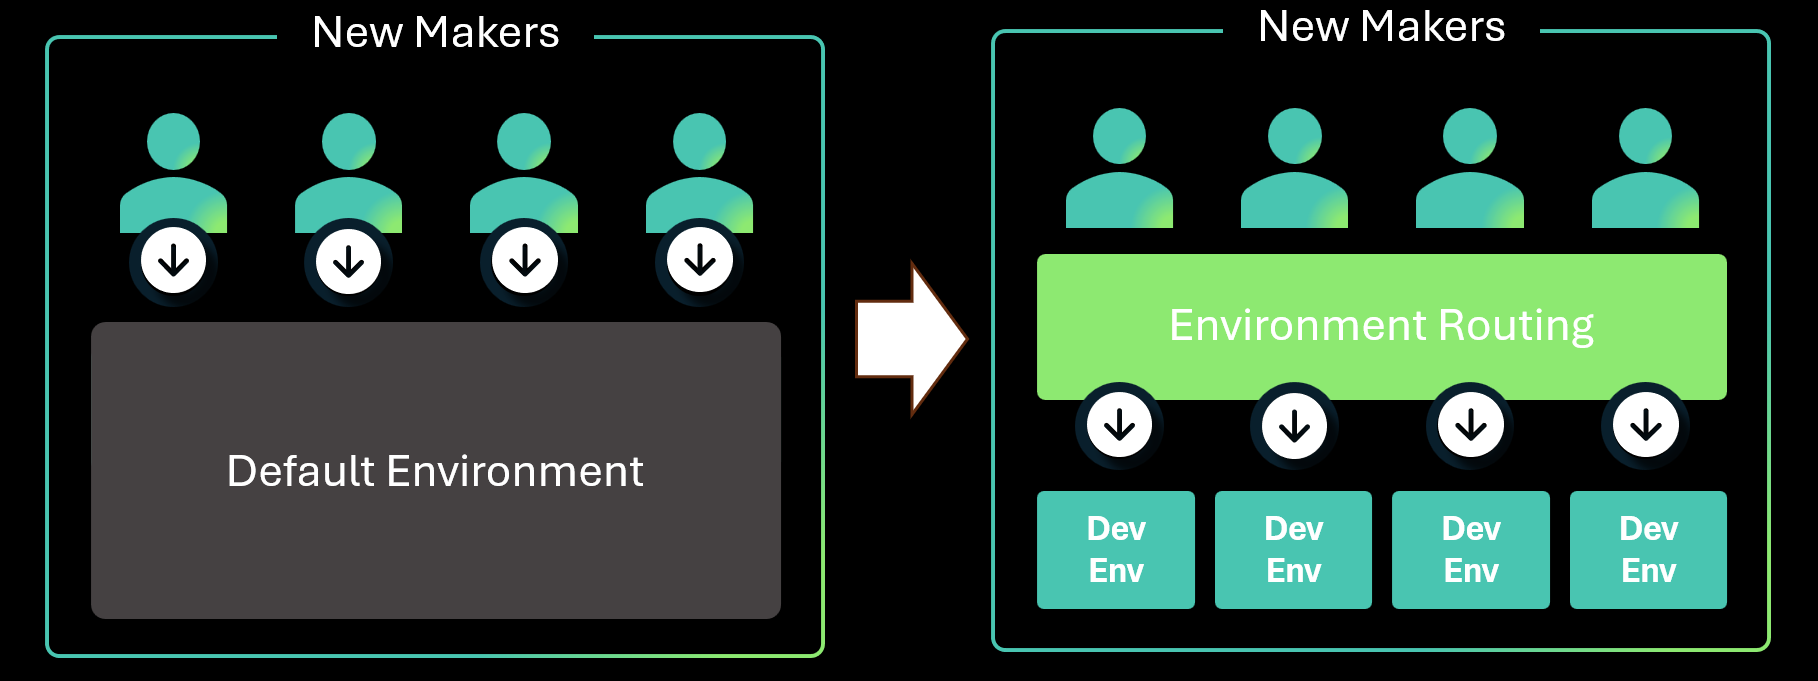 Illustration of a central, shared environment strategy with four makers using the default environment on the left and an environment routing strategy with four makers routing to separate developer environments on the right.